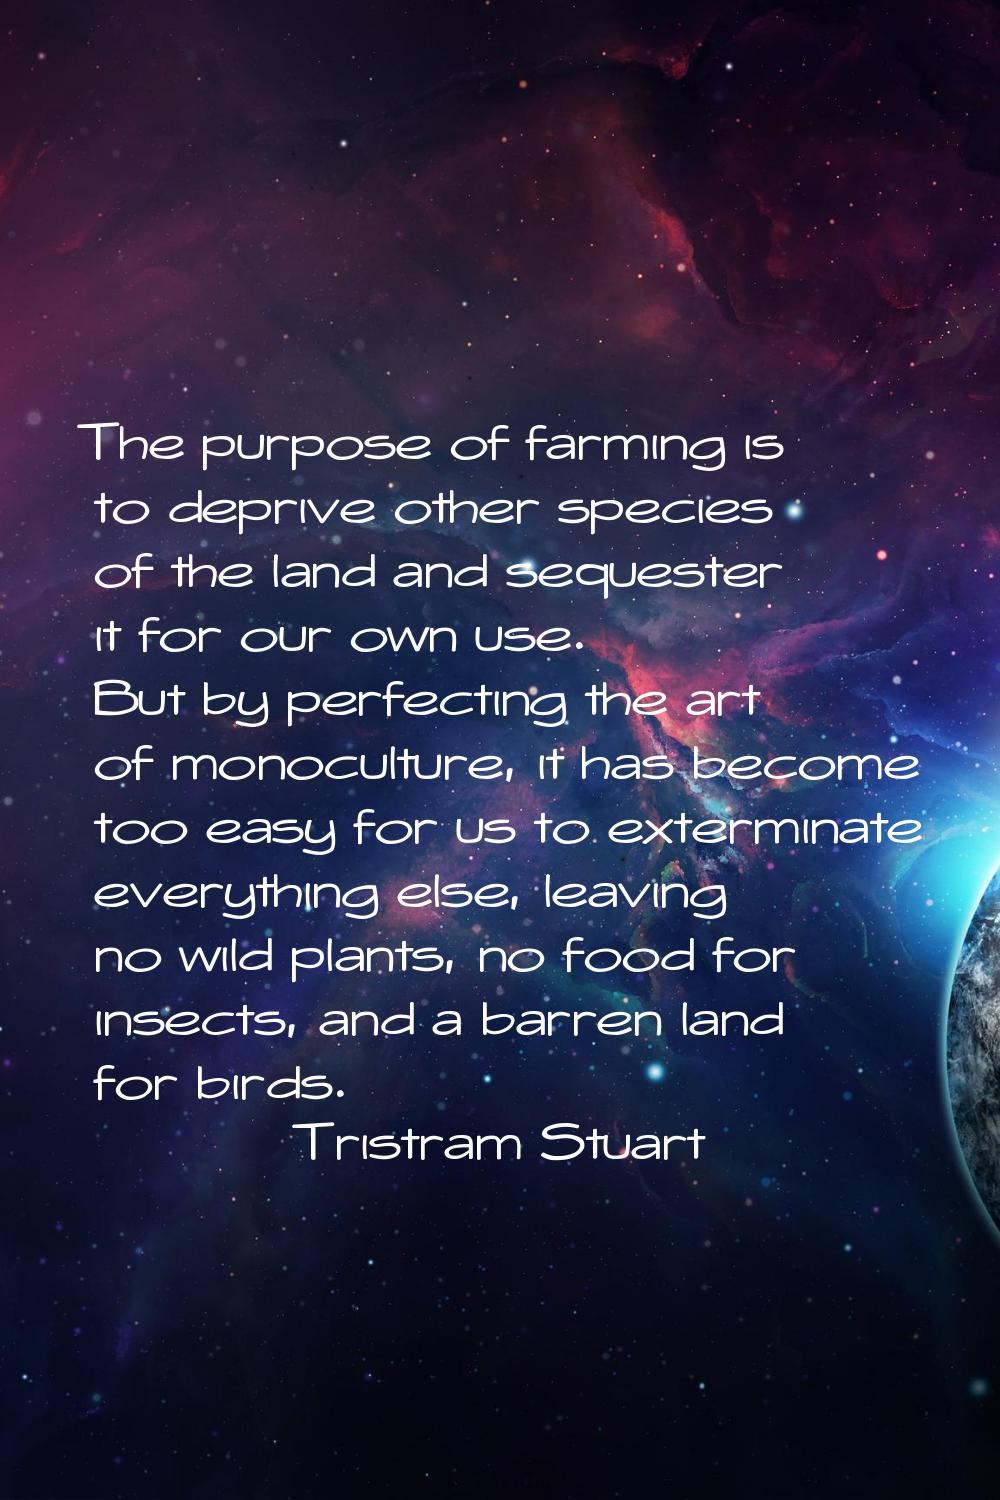 The purpose of farming is to deprive other species of the land and sequester it for our own use. Bu